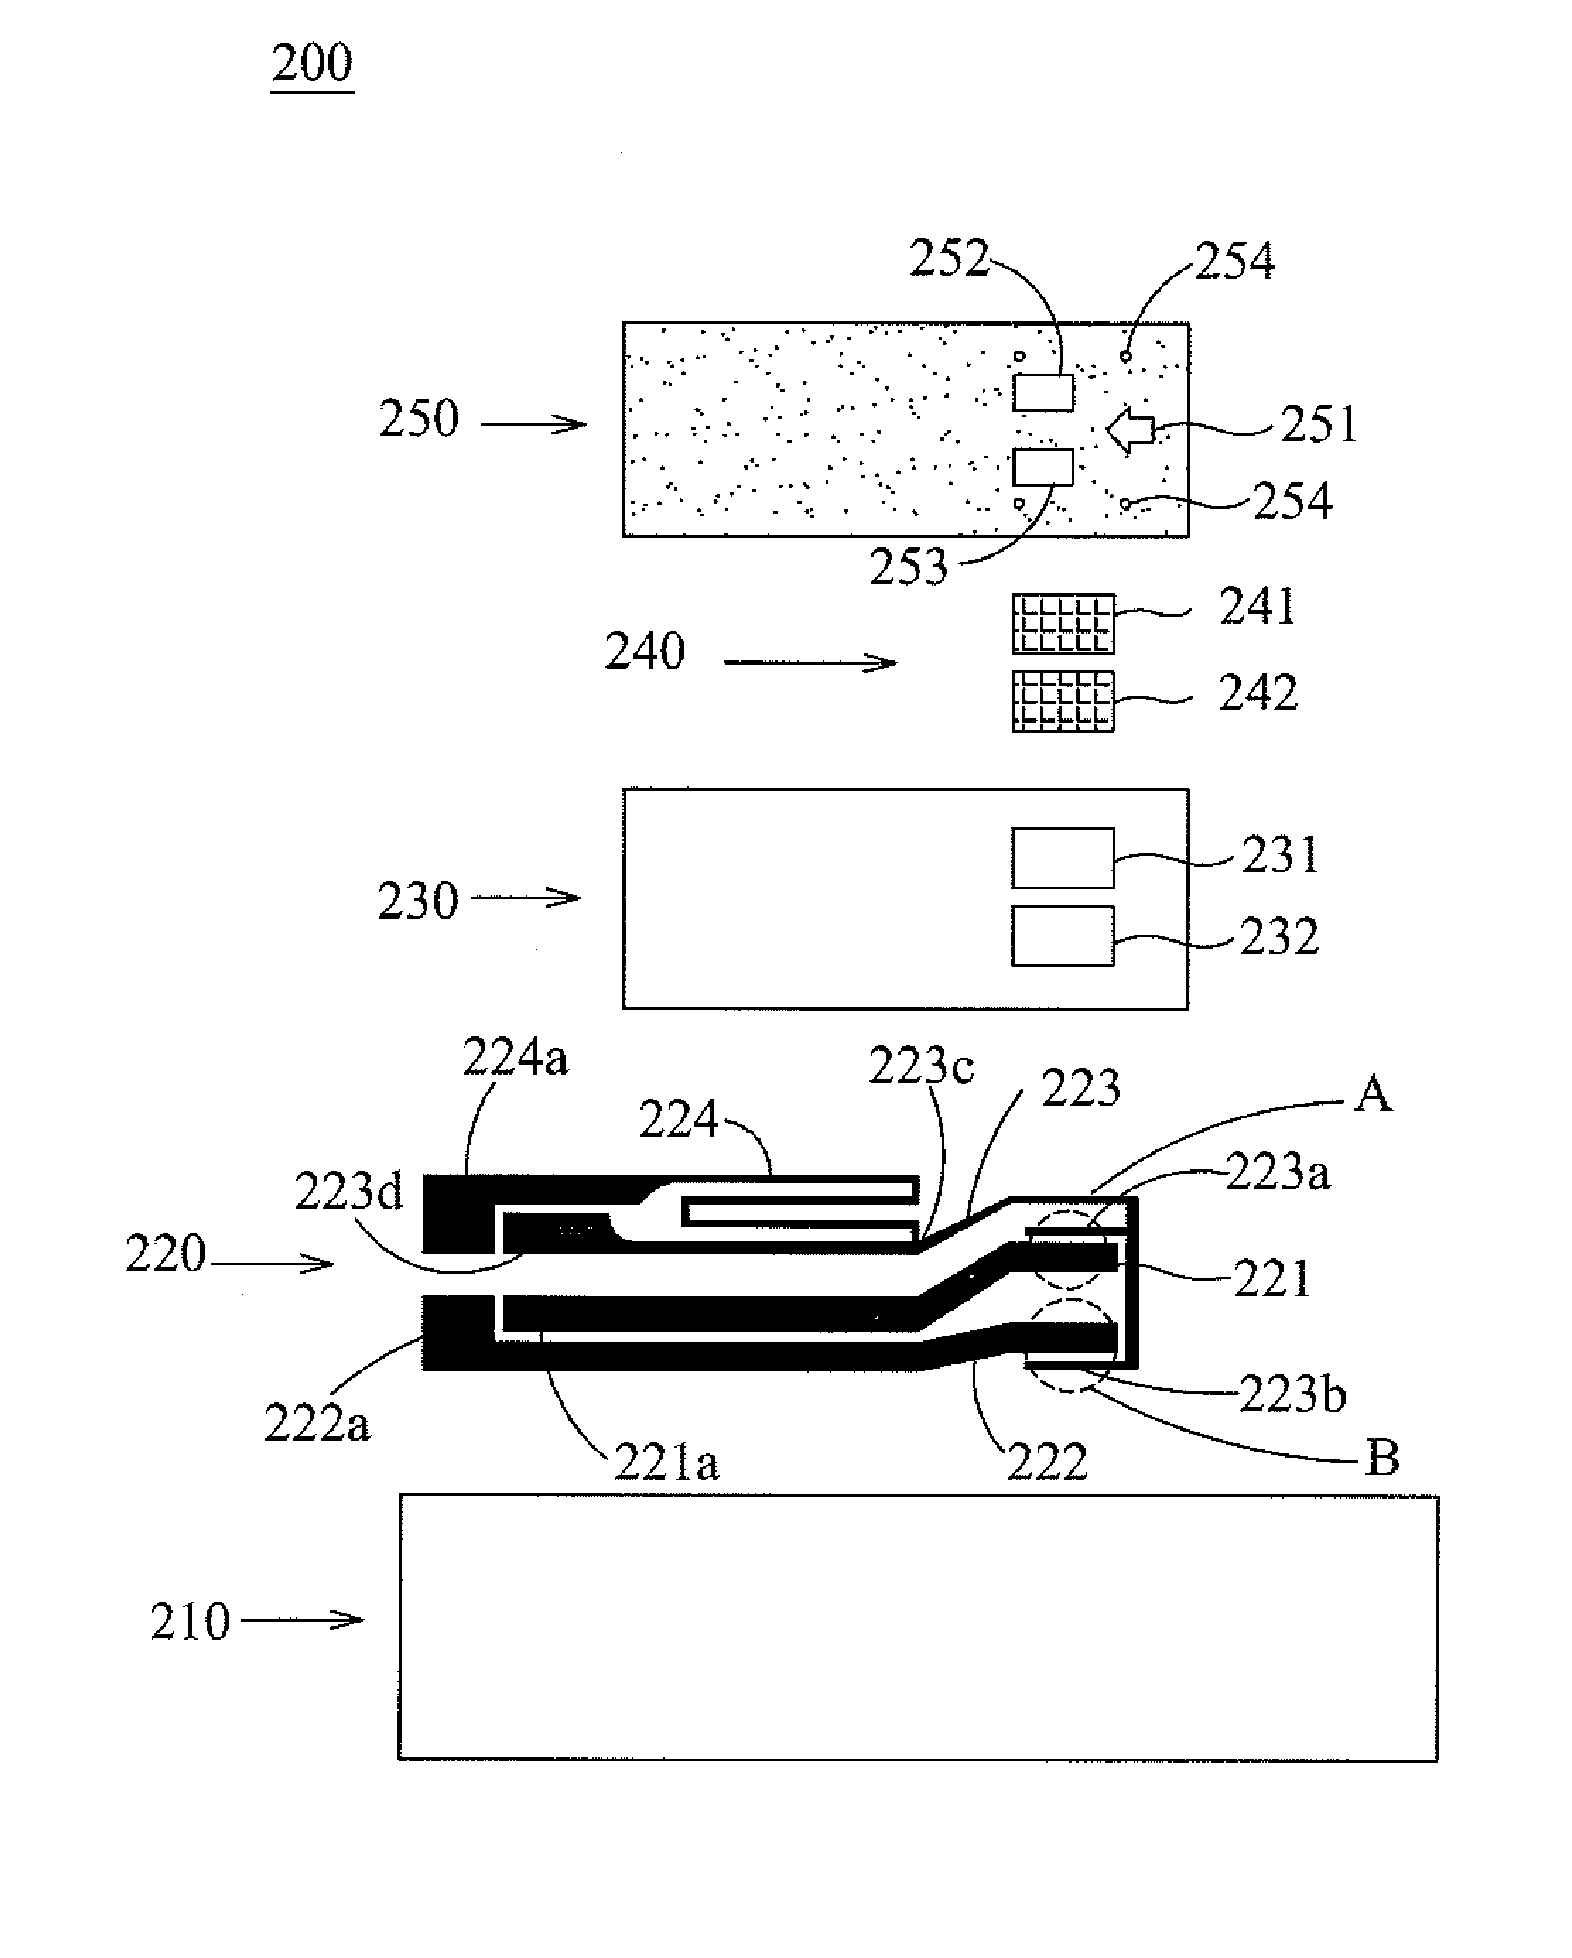 Electrochemical quantitative analysis system and method for the same